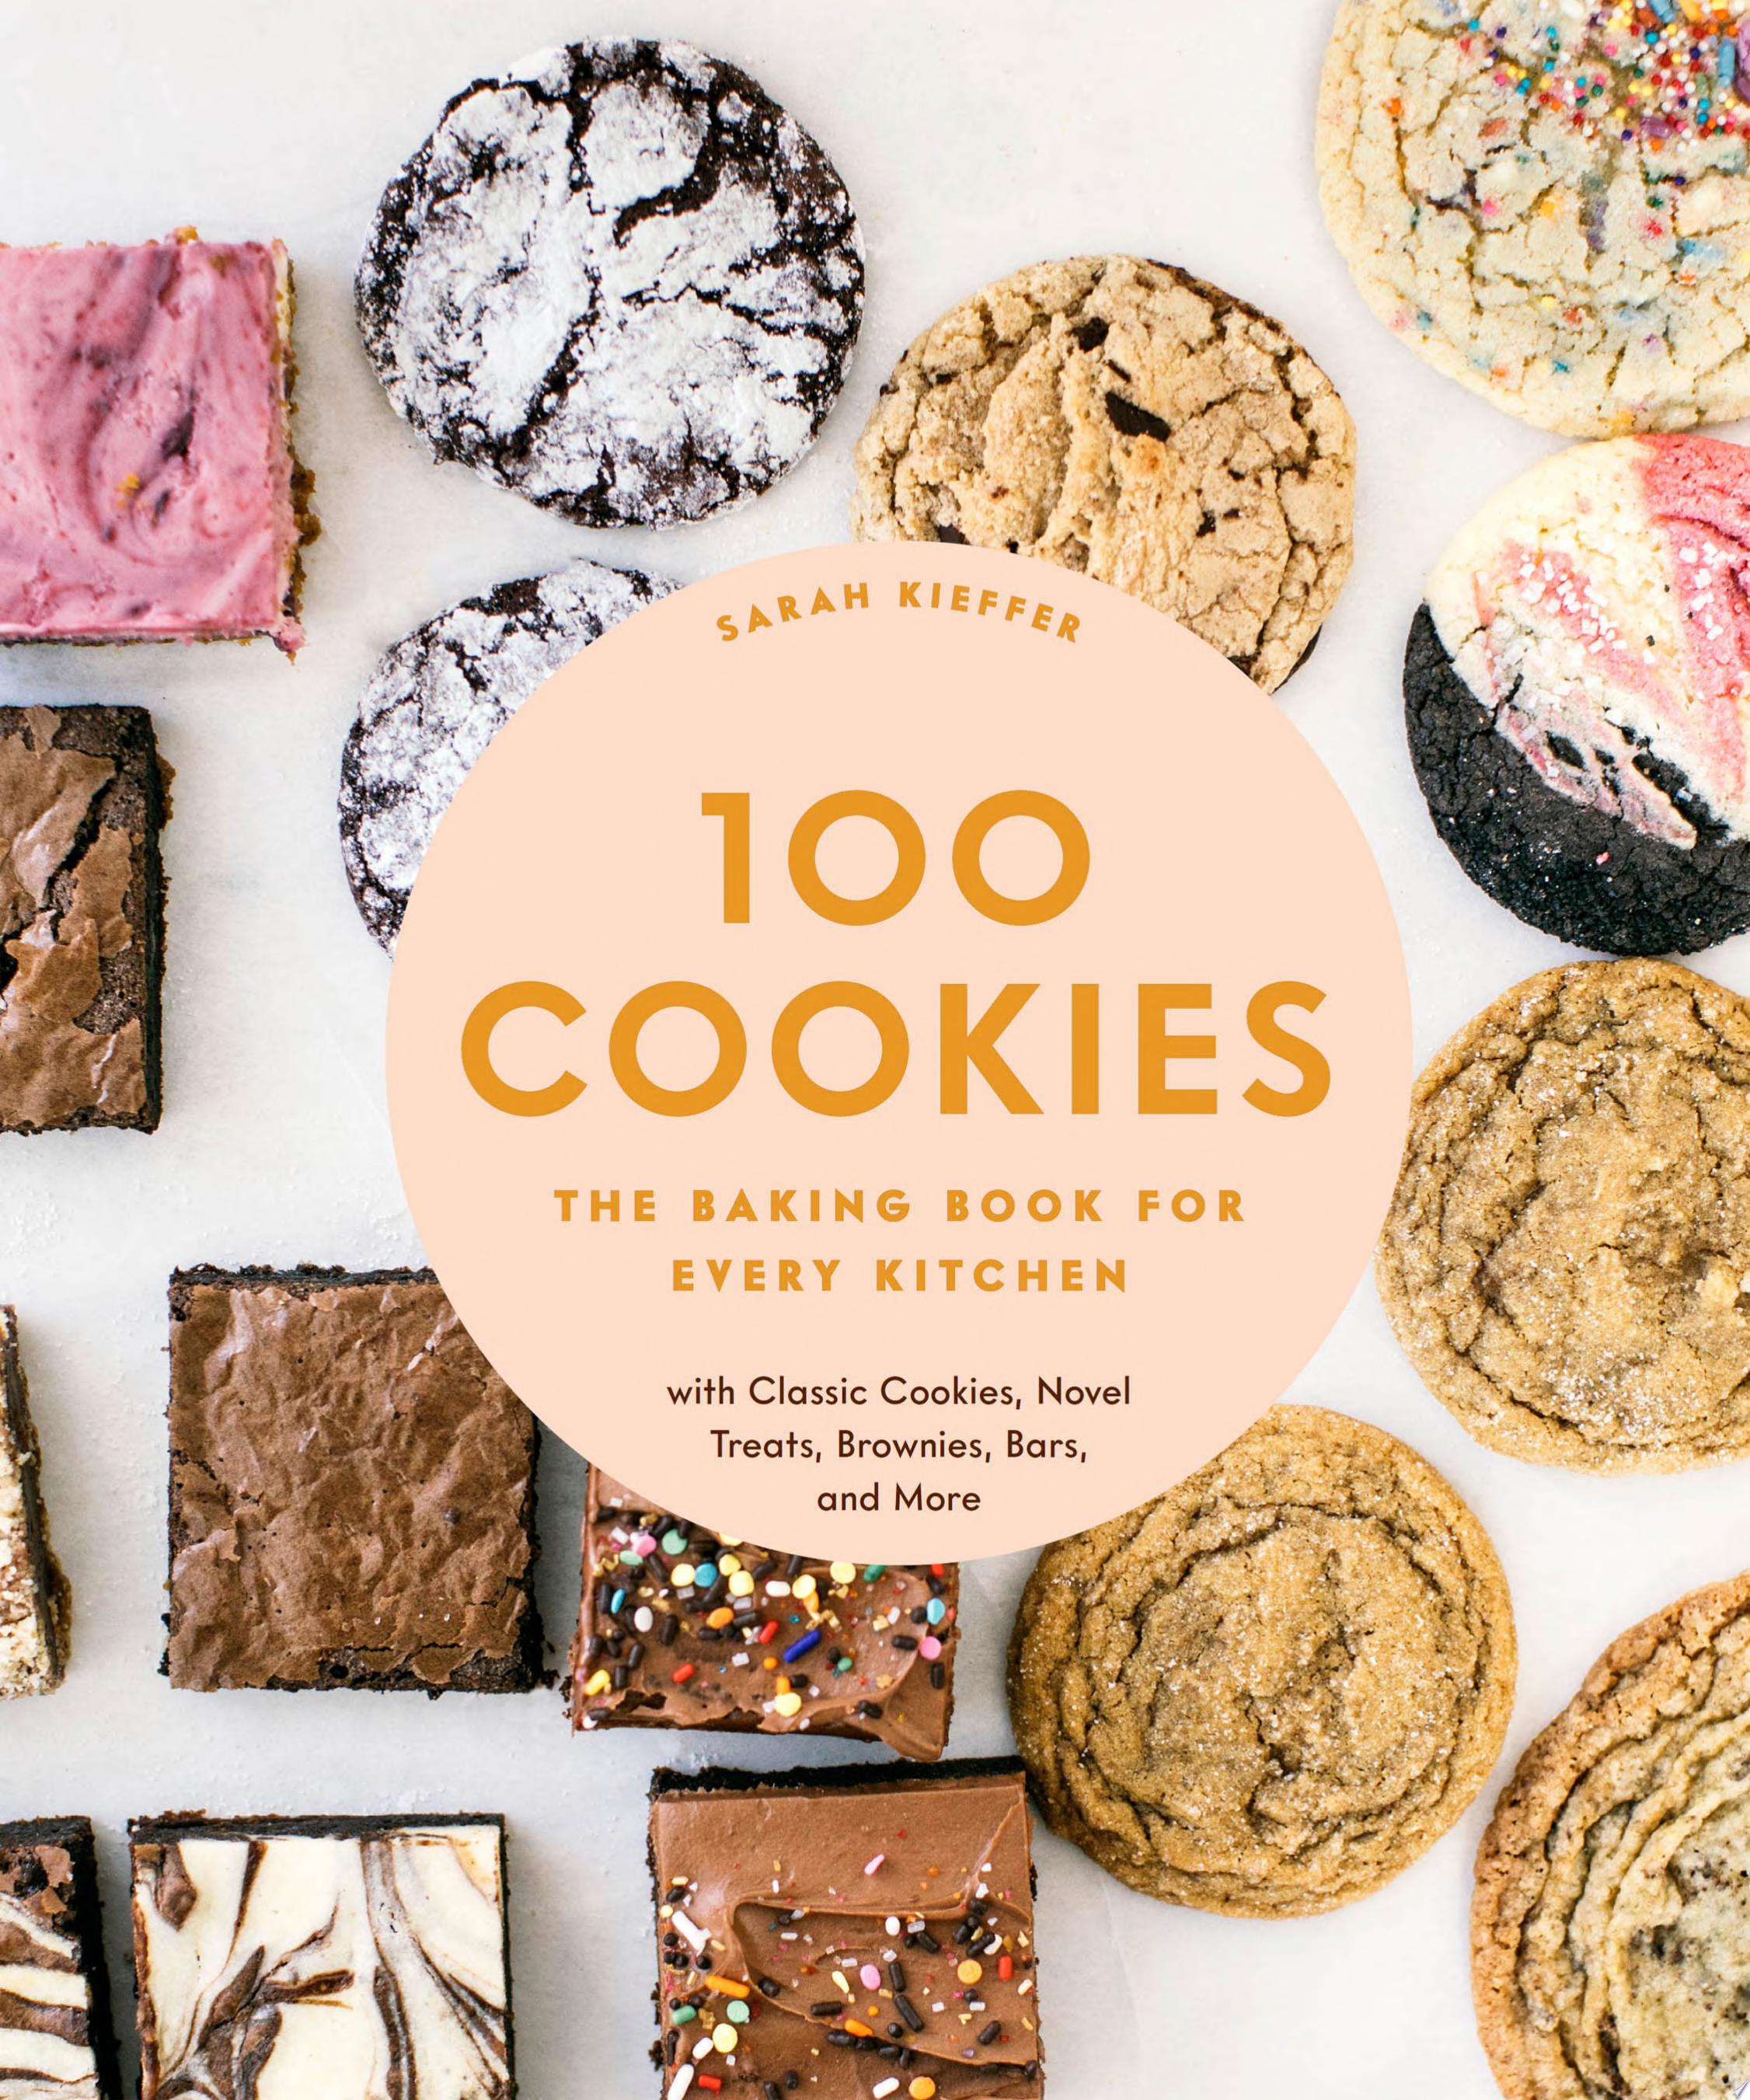 Image for "100 Cookies"